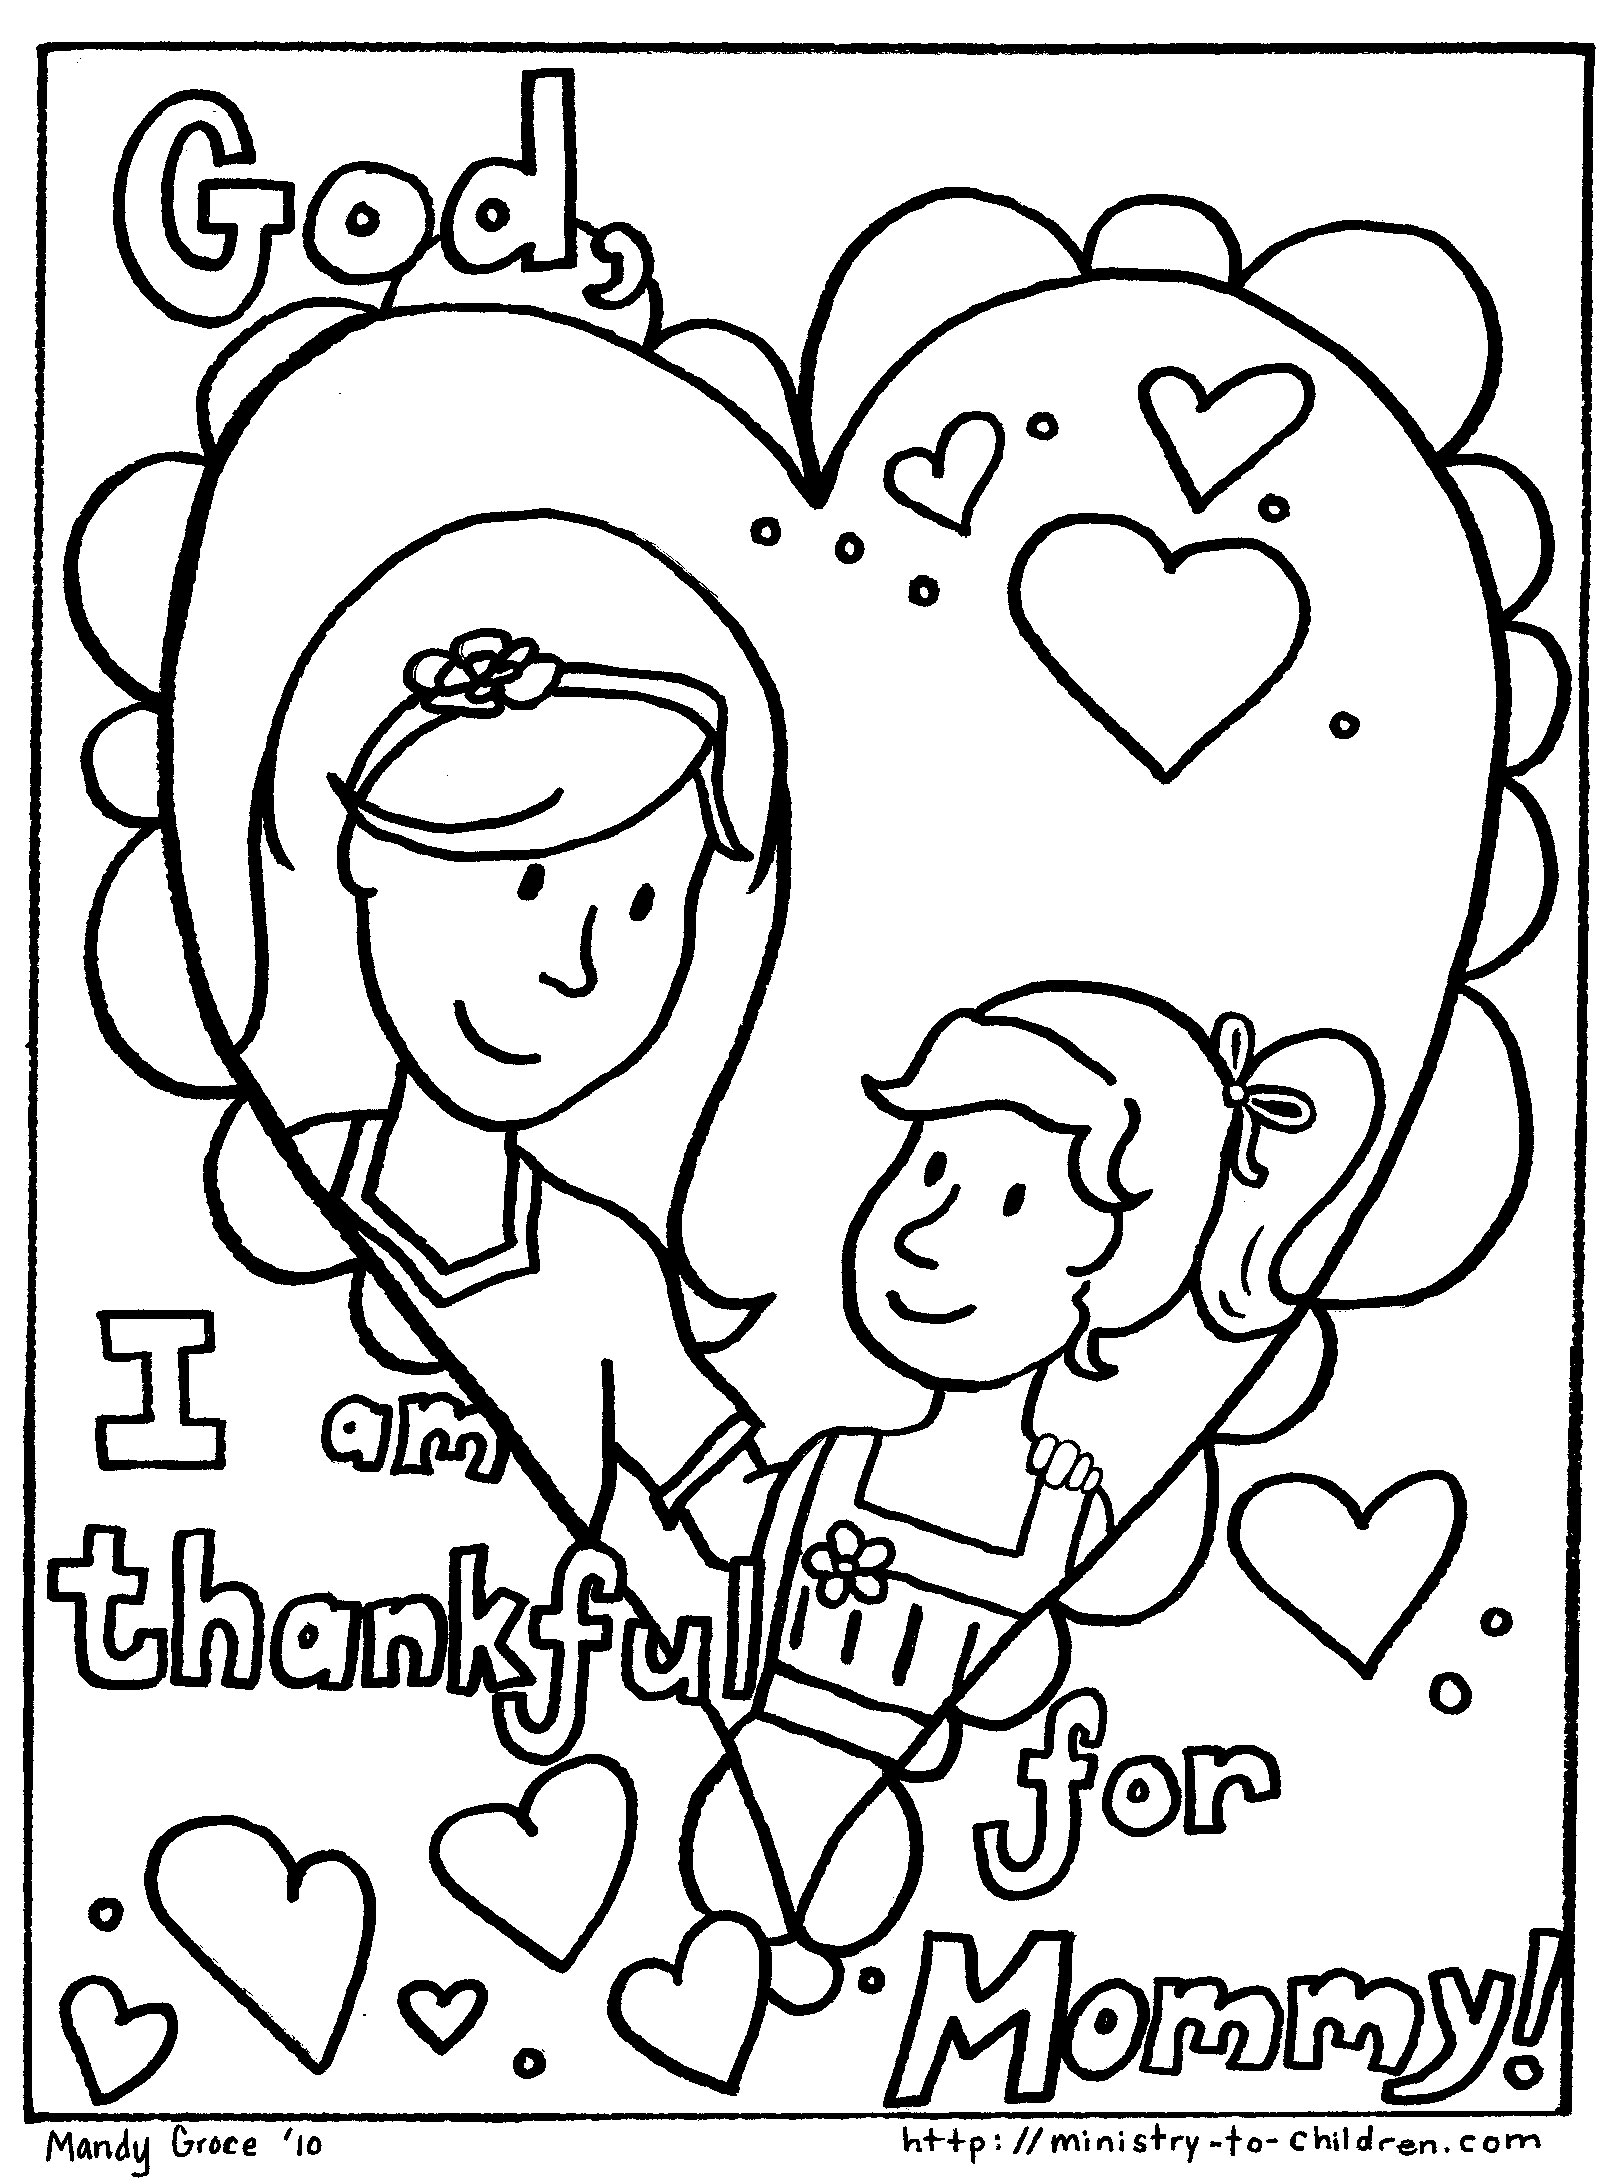 Mother day coloring pages to download and print for free